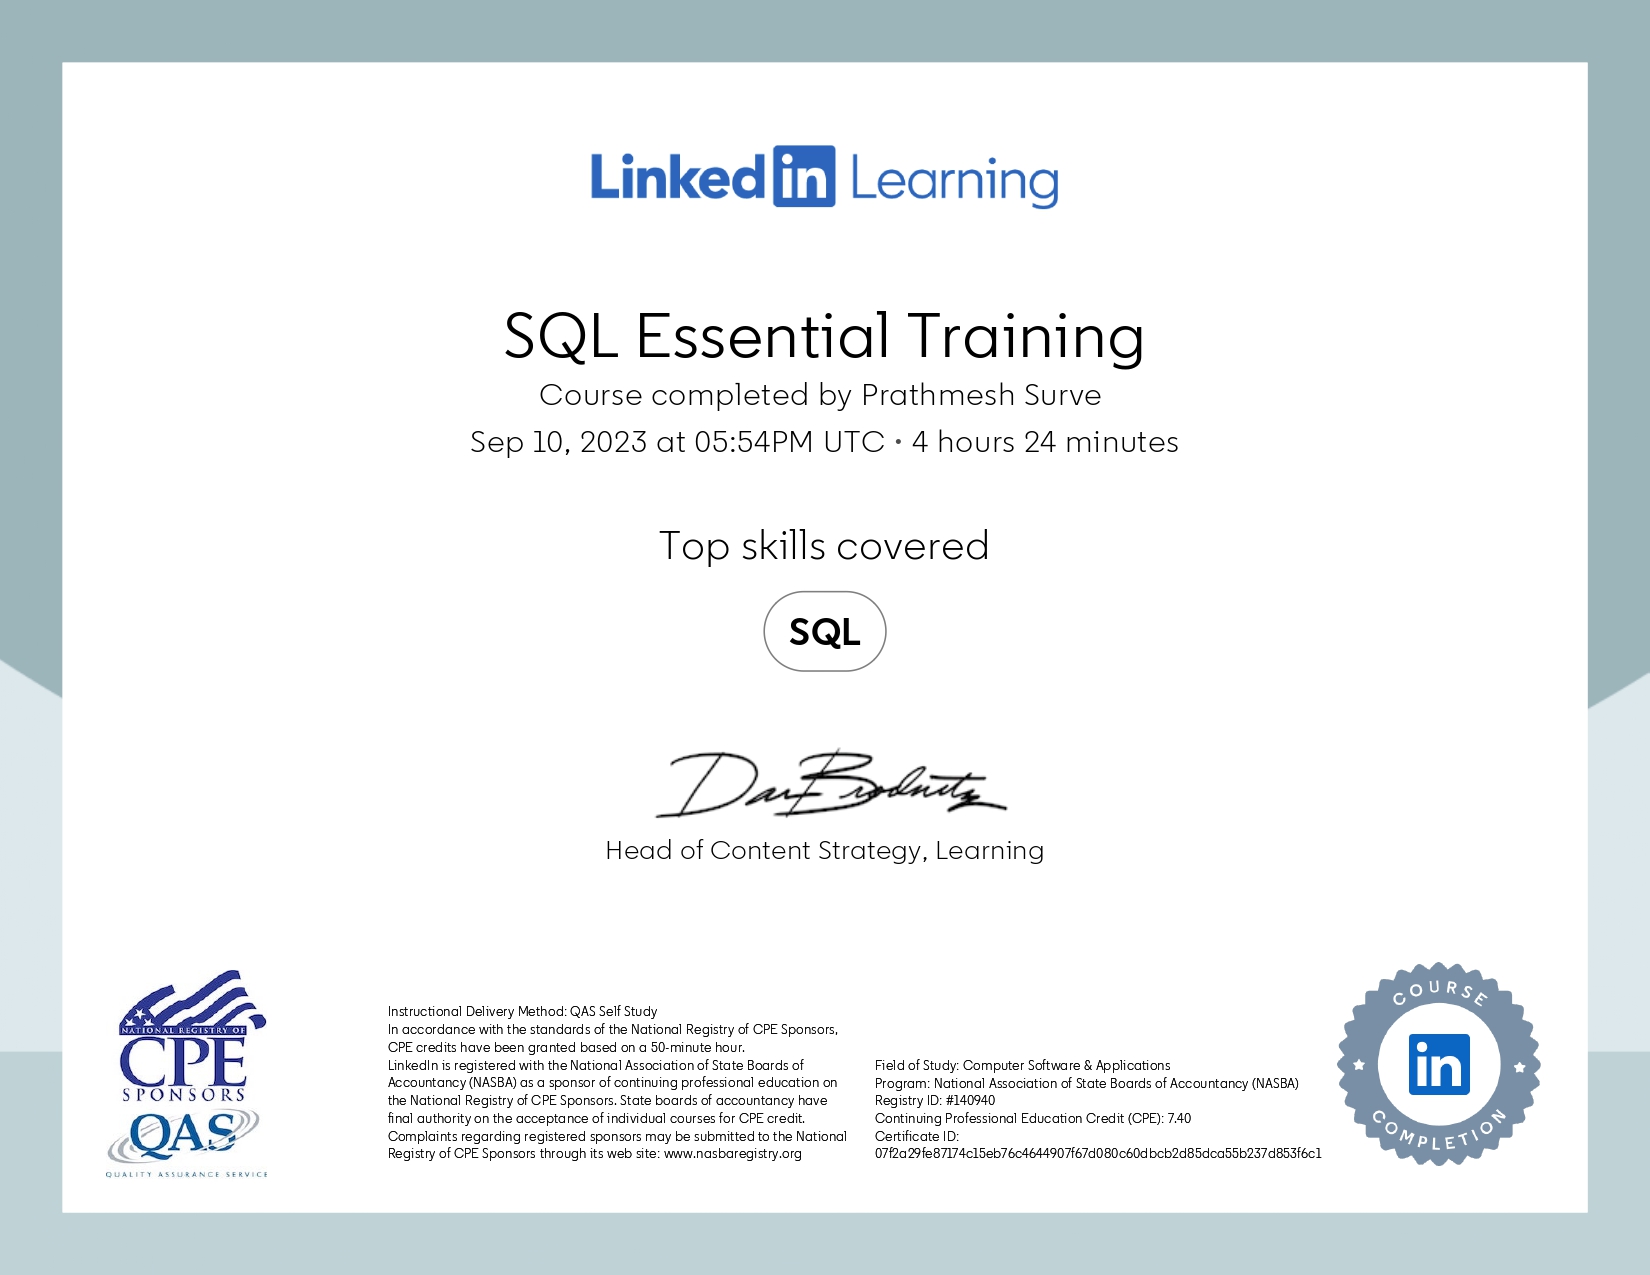 SQL Essential Training Certificate by LinkedIn